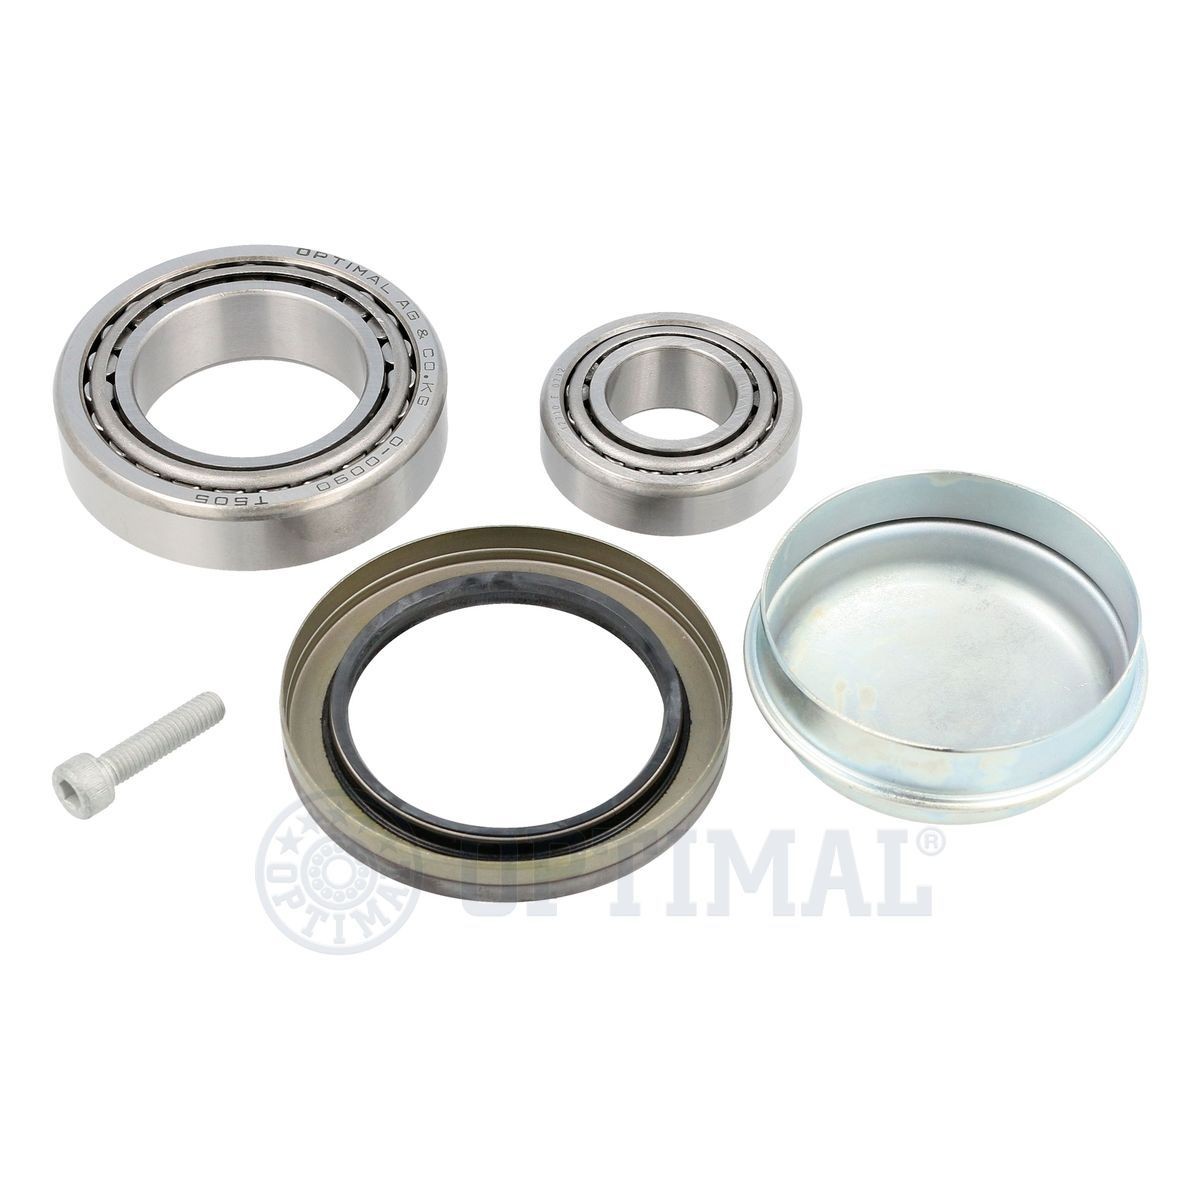 OPTIMAL Hub bearing 401501 suitable for MERCEDES-BENZ E-Class, SL, CLS